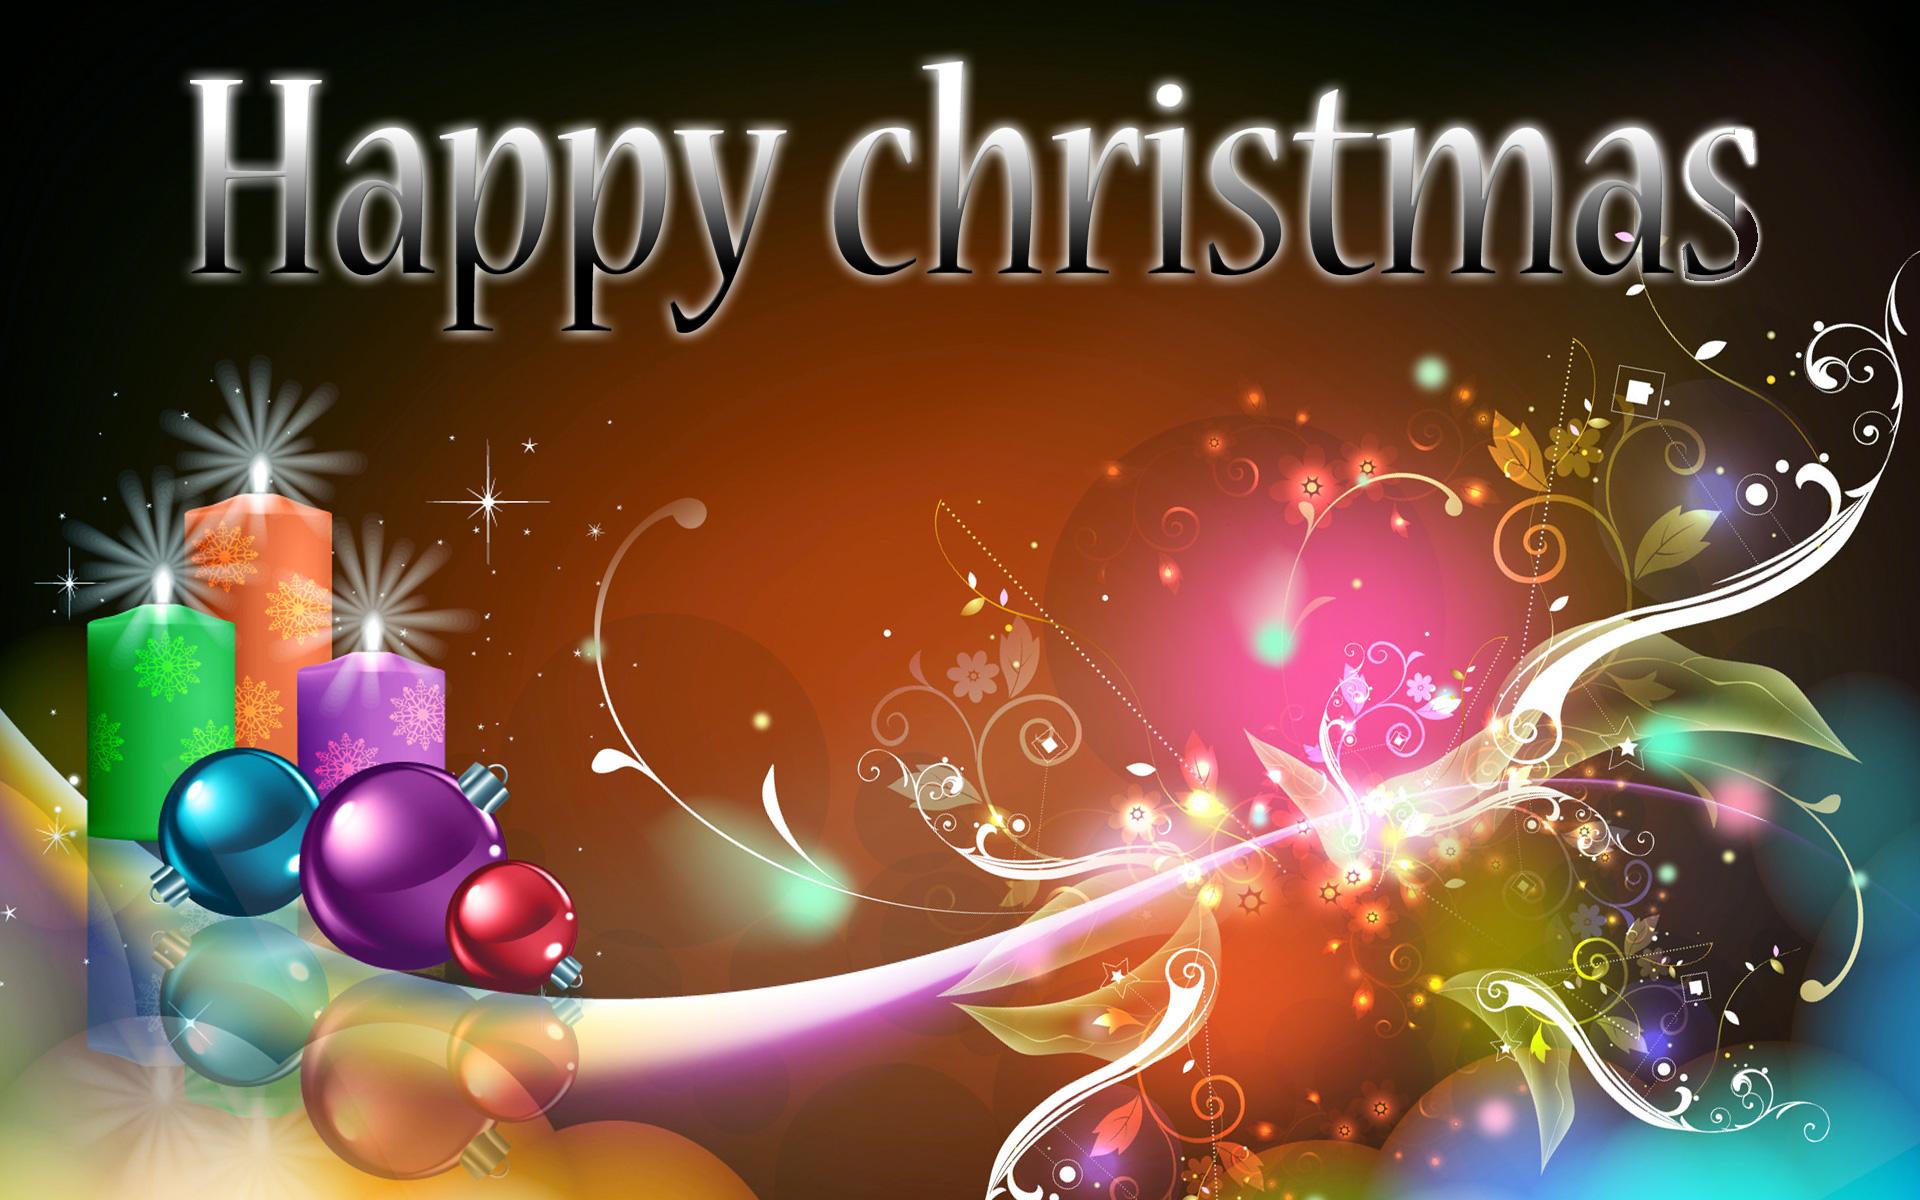 Happy Merry Christmas day Wallpaper